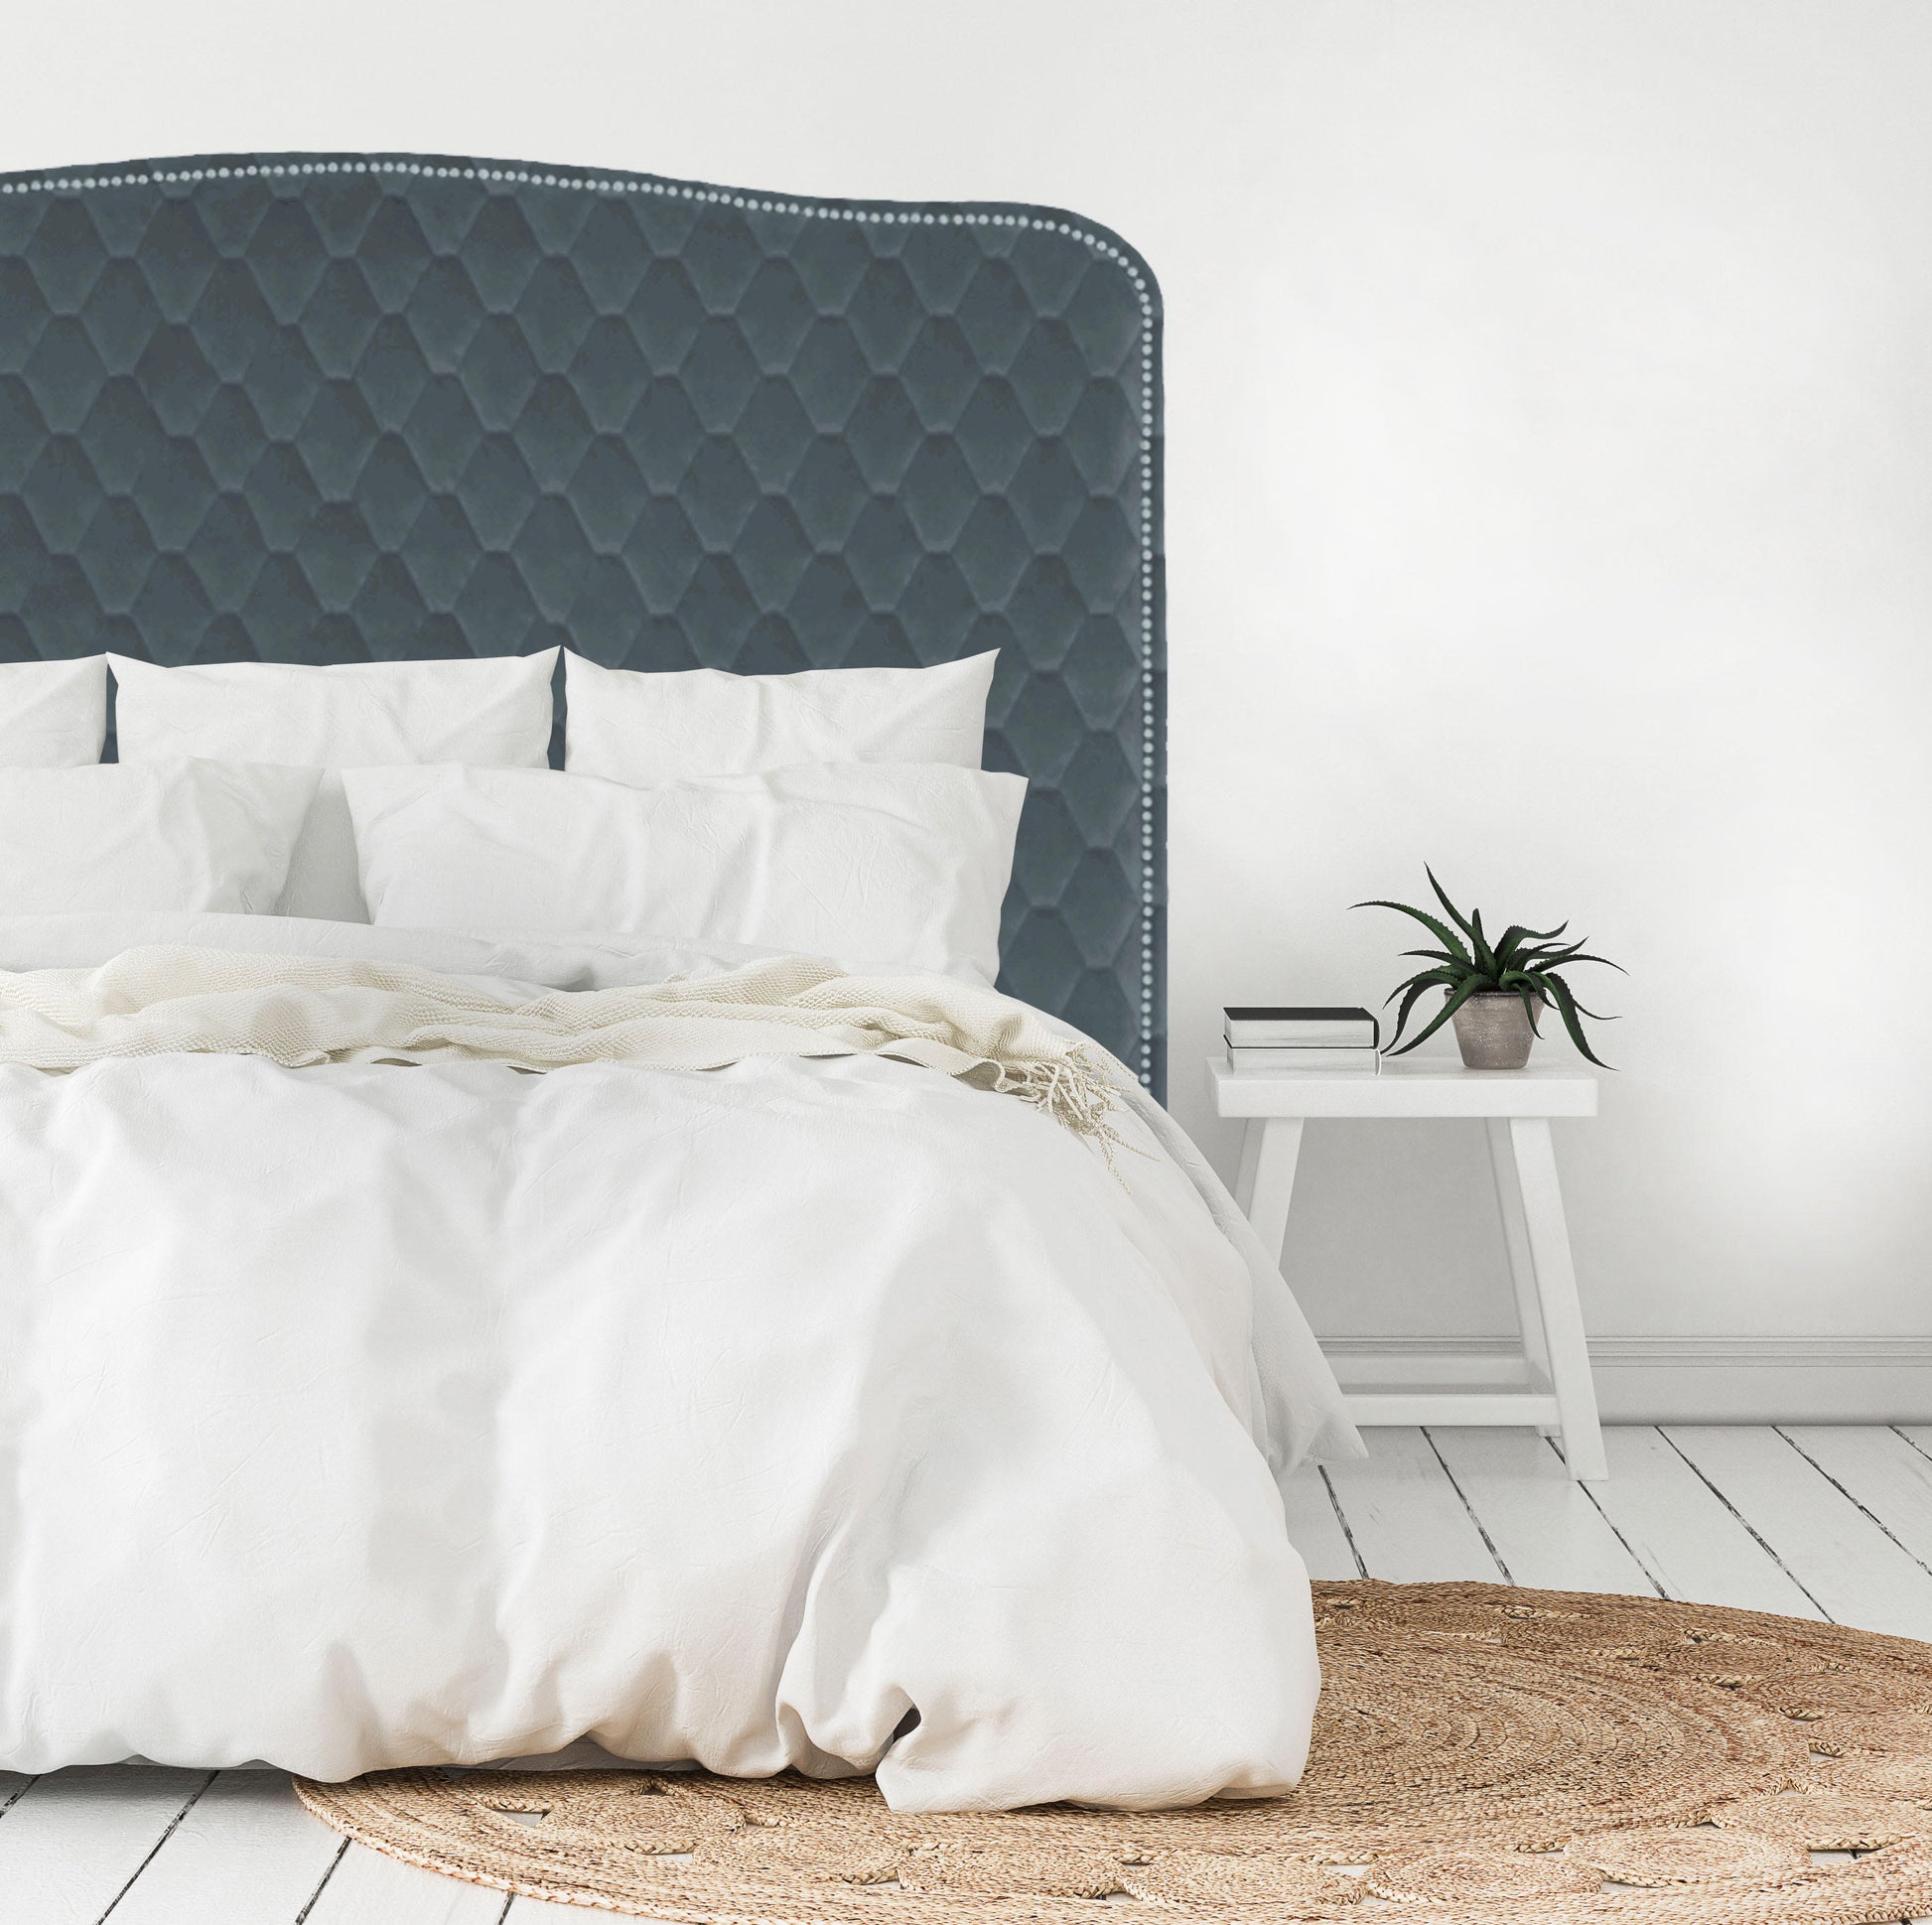 Our classic Cleveland style headboard, upholstered in a diamond stitch-patterned velvet and finished with a row of silver strip studs. NZ made, please allow 6-weeks for production.